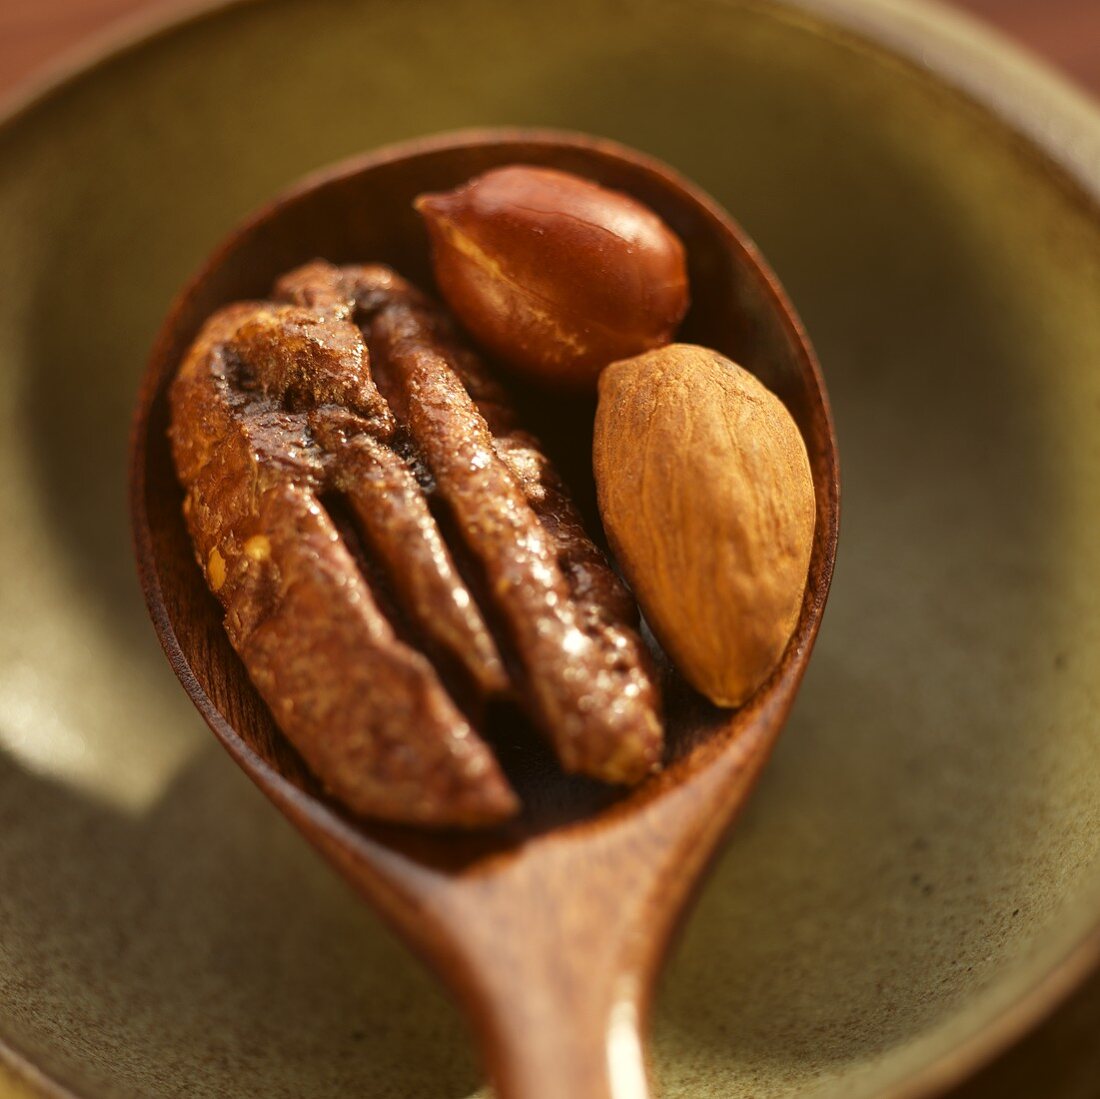 Spiced Pecan, Almond and Peanut in Wooden Spoon